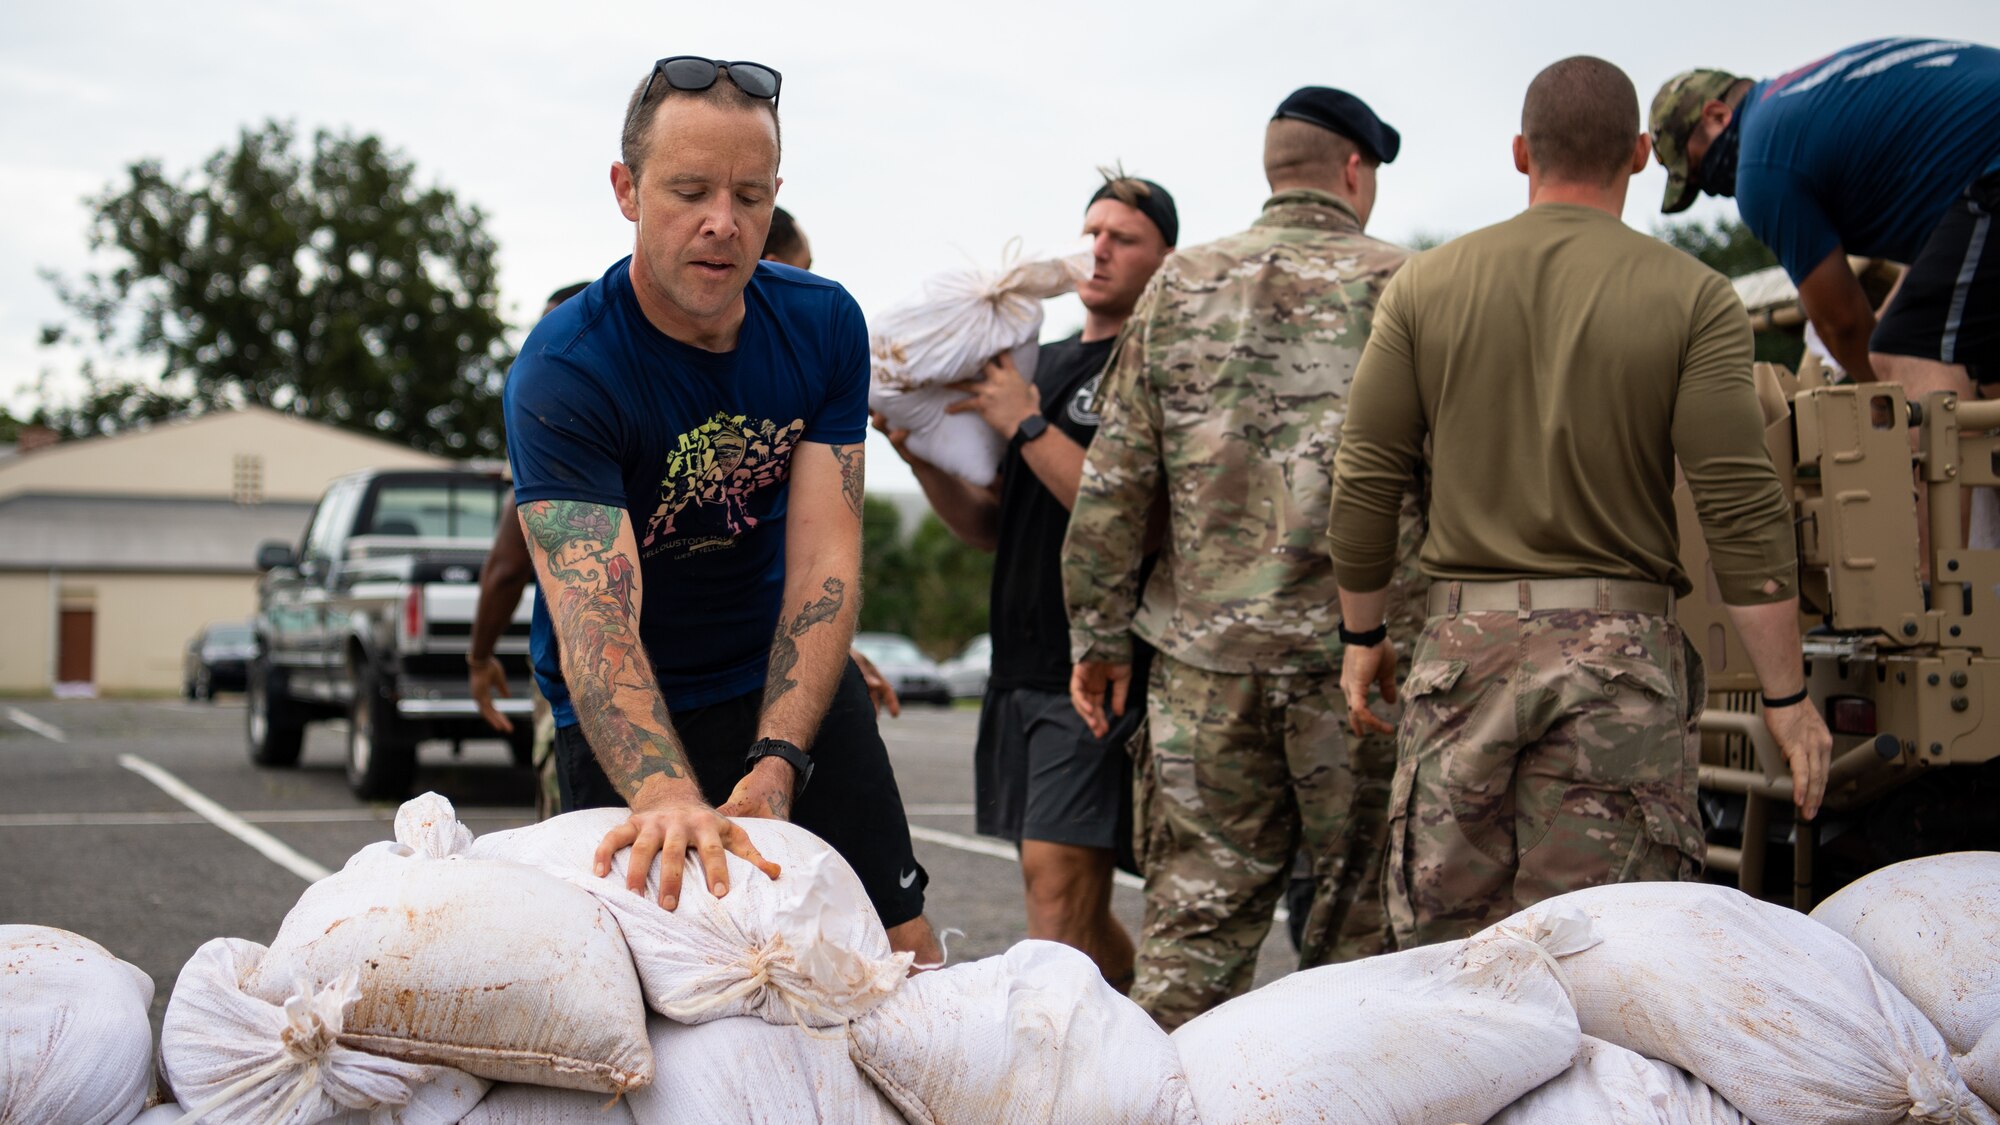 Airmen from the 2nd Security Forces Squadron unload sand bags at Barksdale Air Force Base, La., Aug. 28, 2020. The Airmen were part of a Disaster Response Force organized to help the base recover from damage caused by Hurricane Laura. (U.S. Air Force photo by Airman 1st Class Jacob B. Wrightsman)